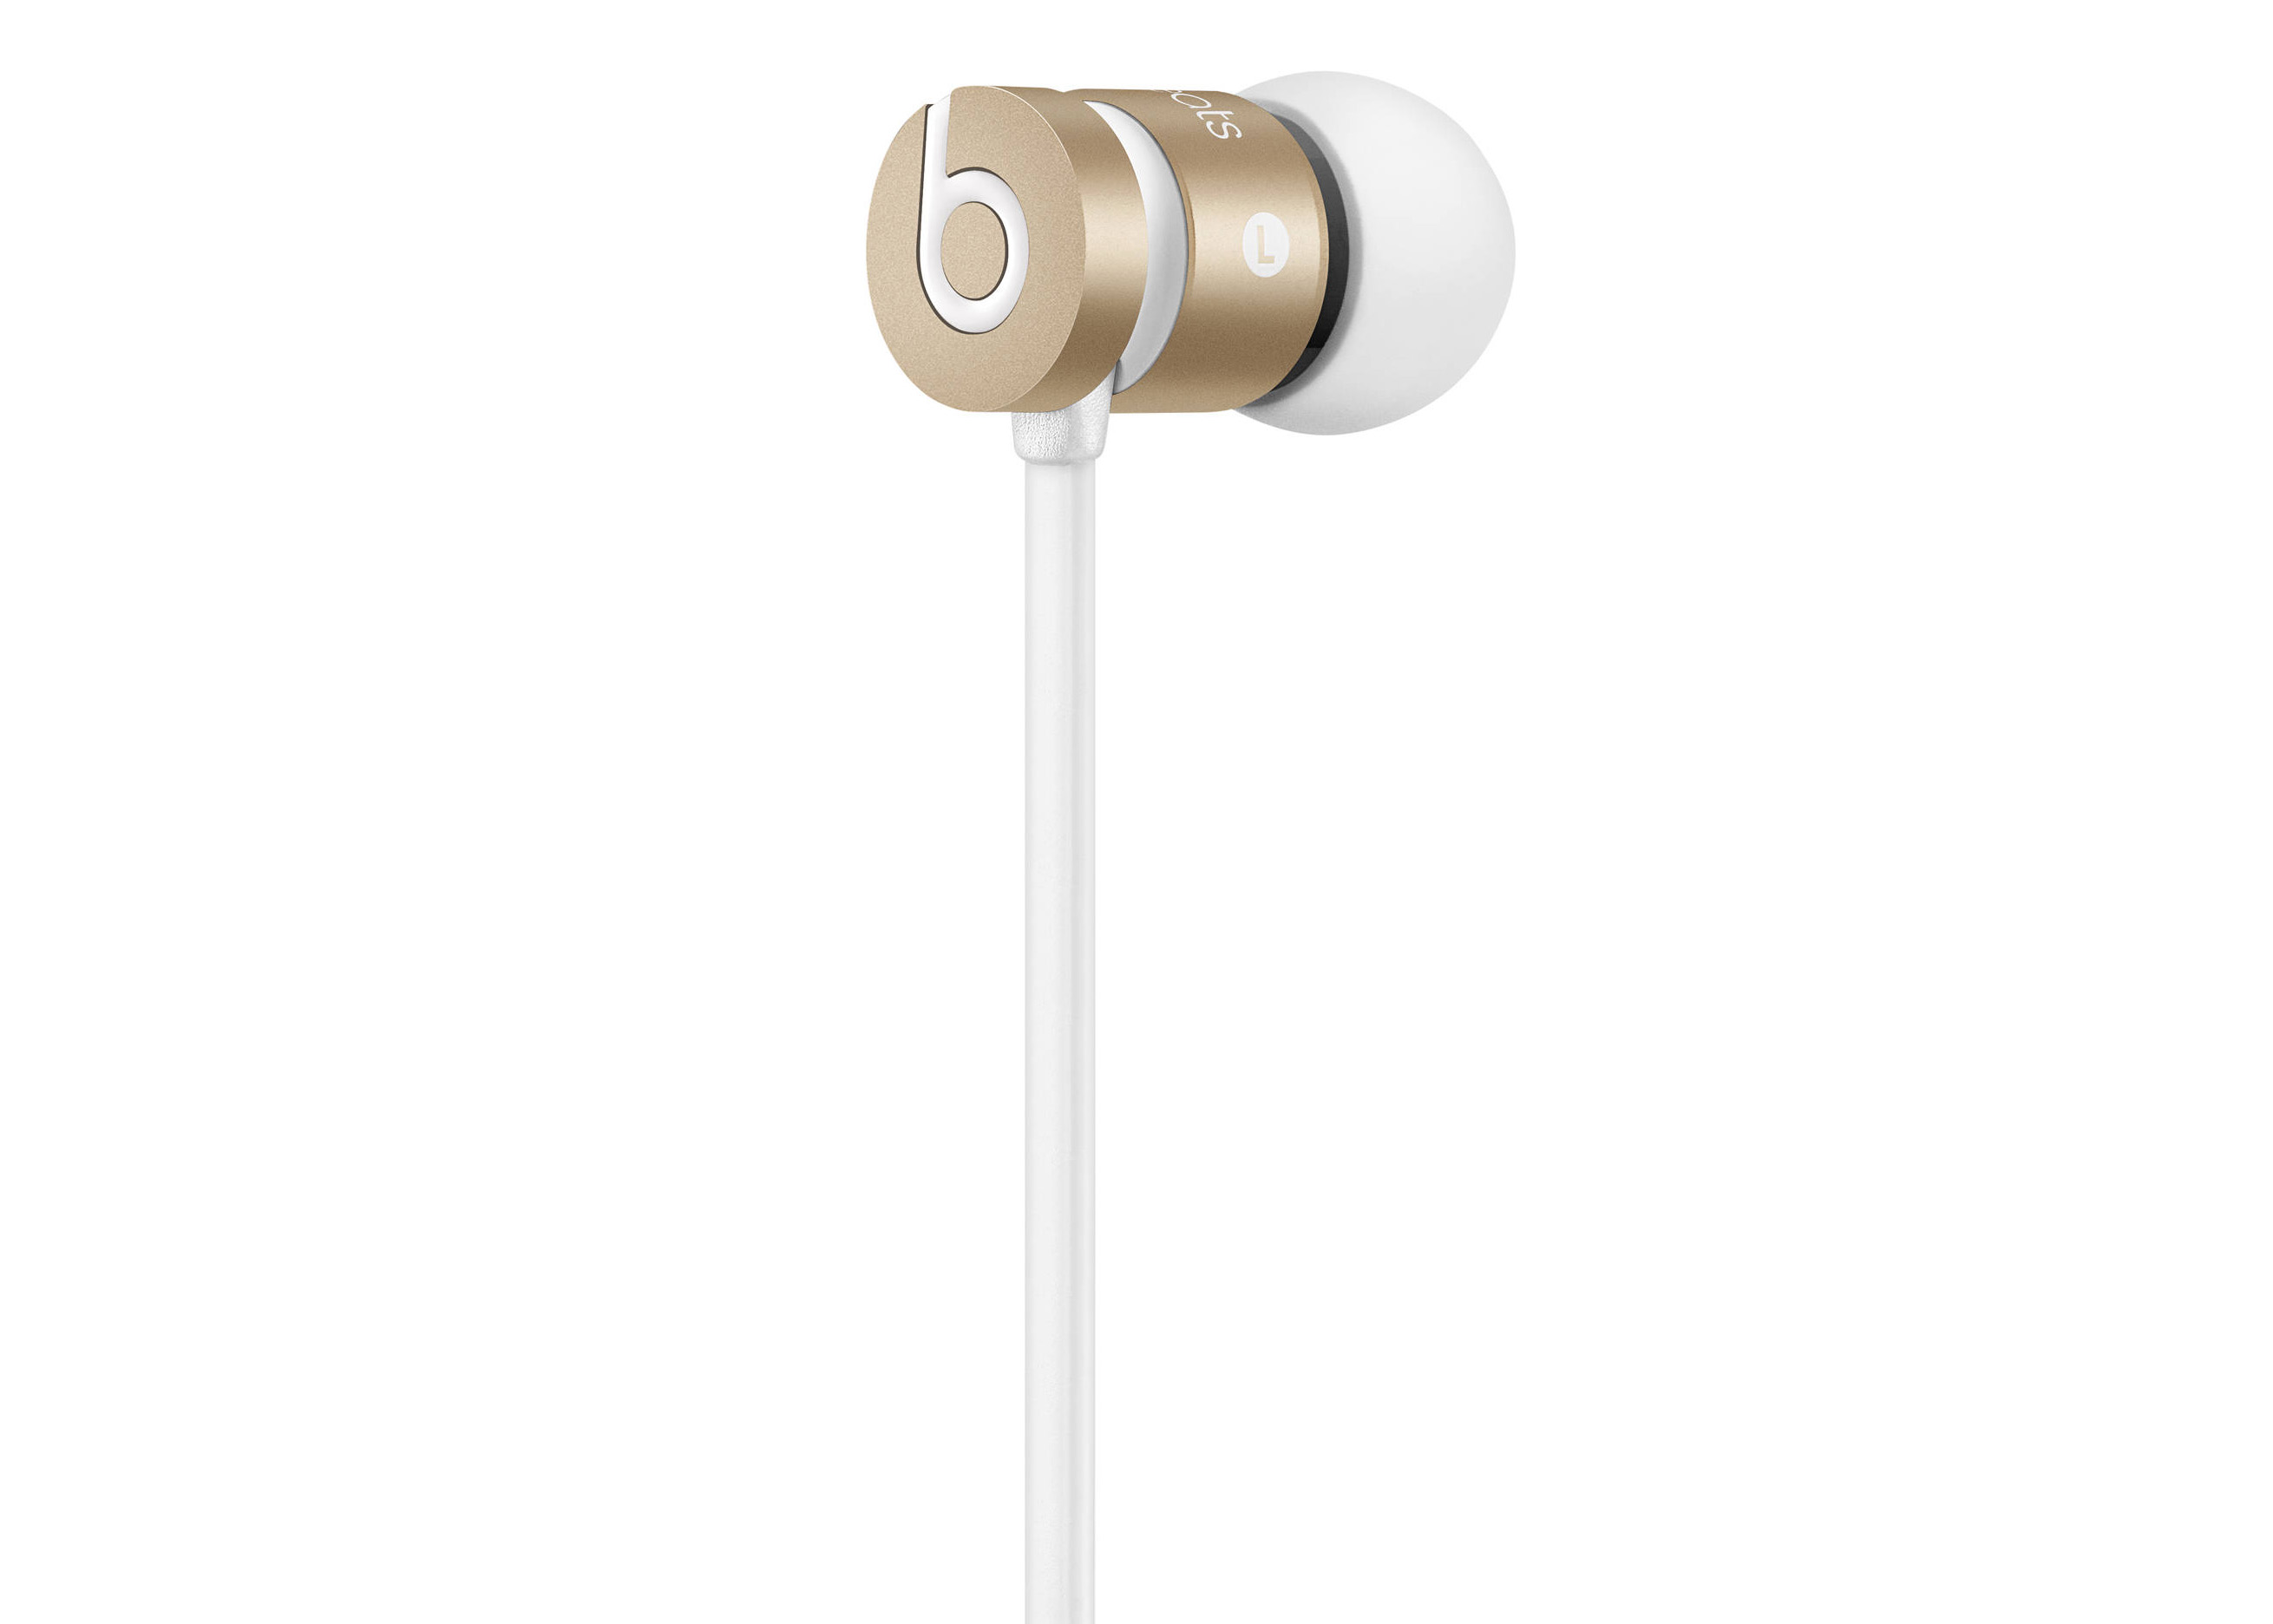 Beats by Dr. Dre urBeats Wired In-Ear Headphones MK9X2AM/B Gold - US